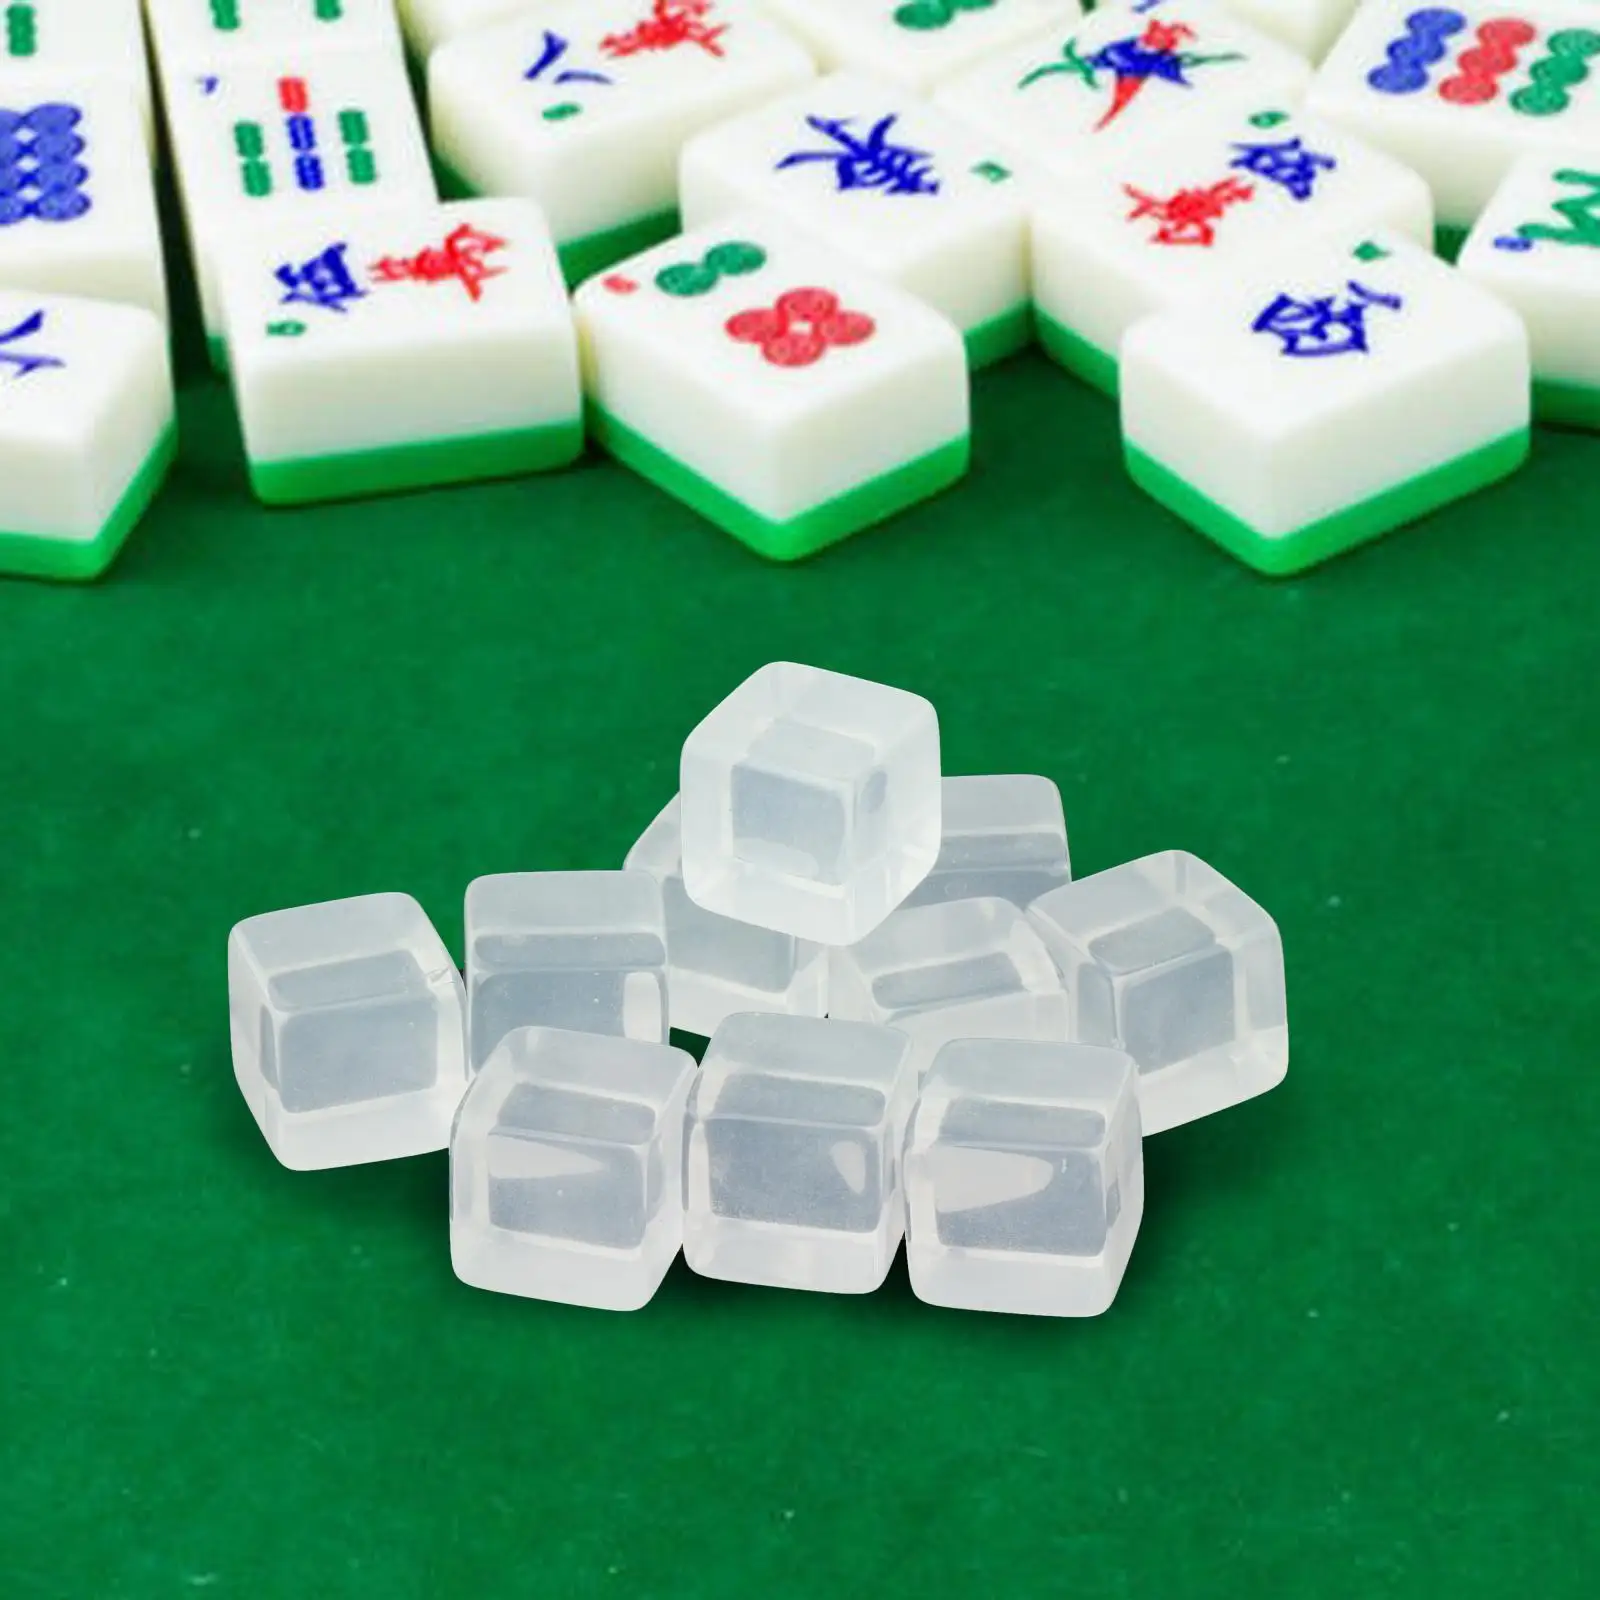 10 Pieces Acrylic 16mm Six Sides Dice Acrylic for Party Supplies,Dice Making